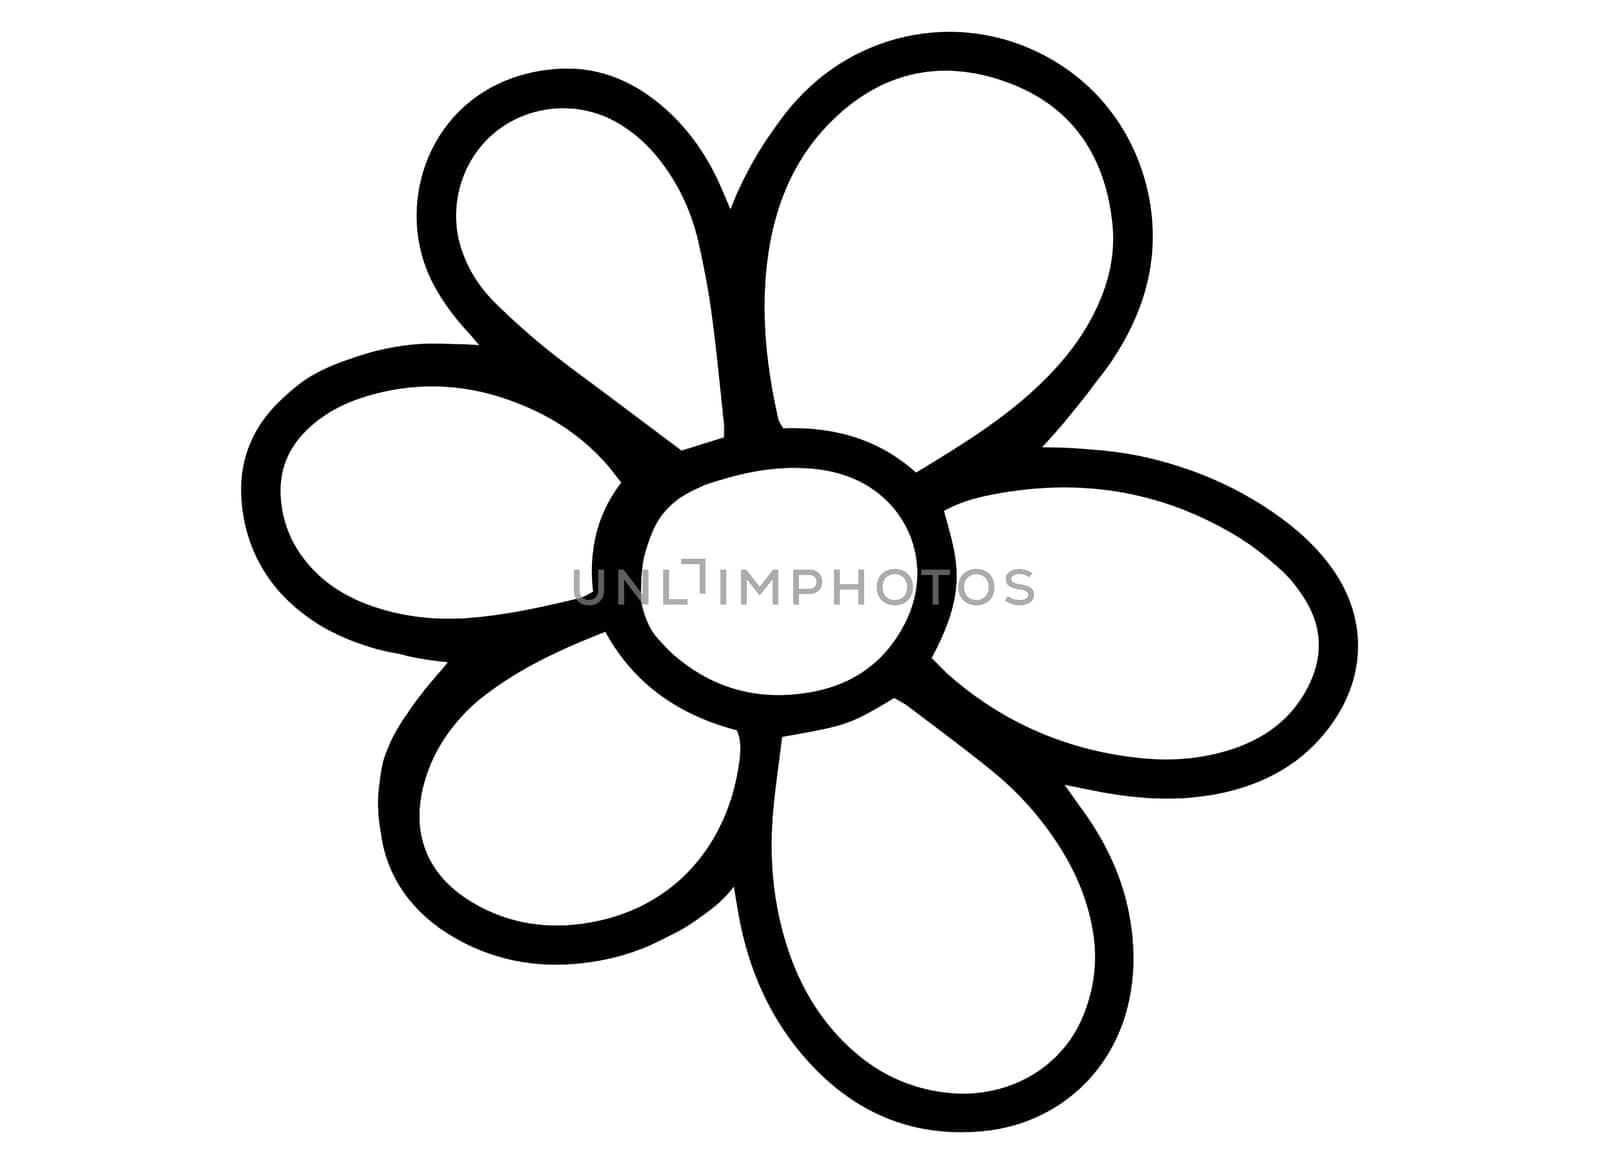 Printable Coloring Page for Kids. Black and White Daisy Flower Isolated Illustration. by Rina_Dozornaya